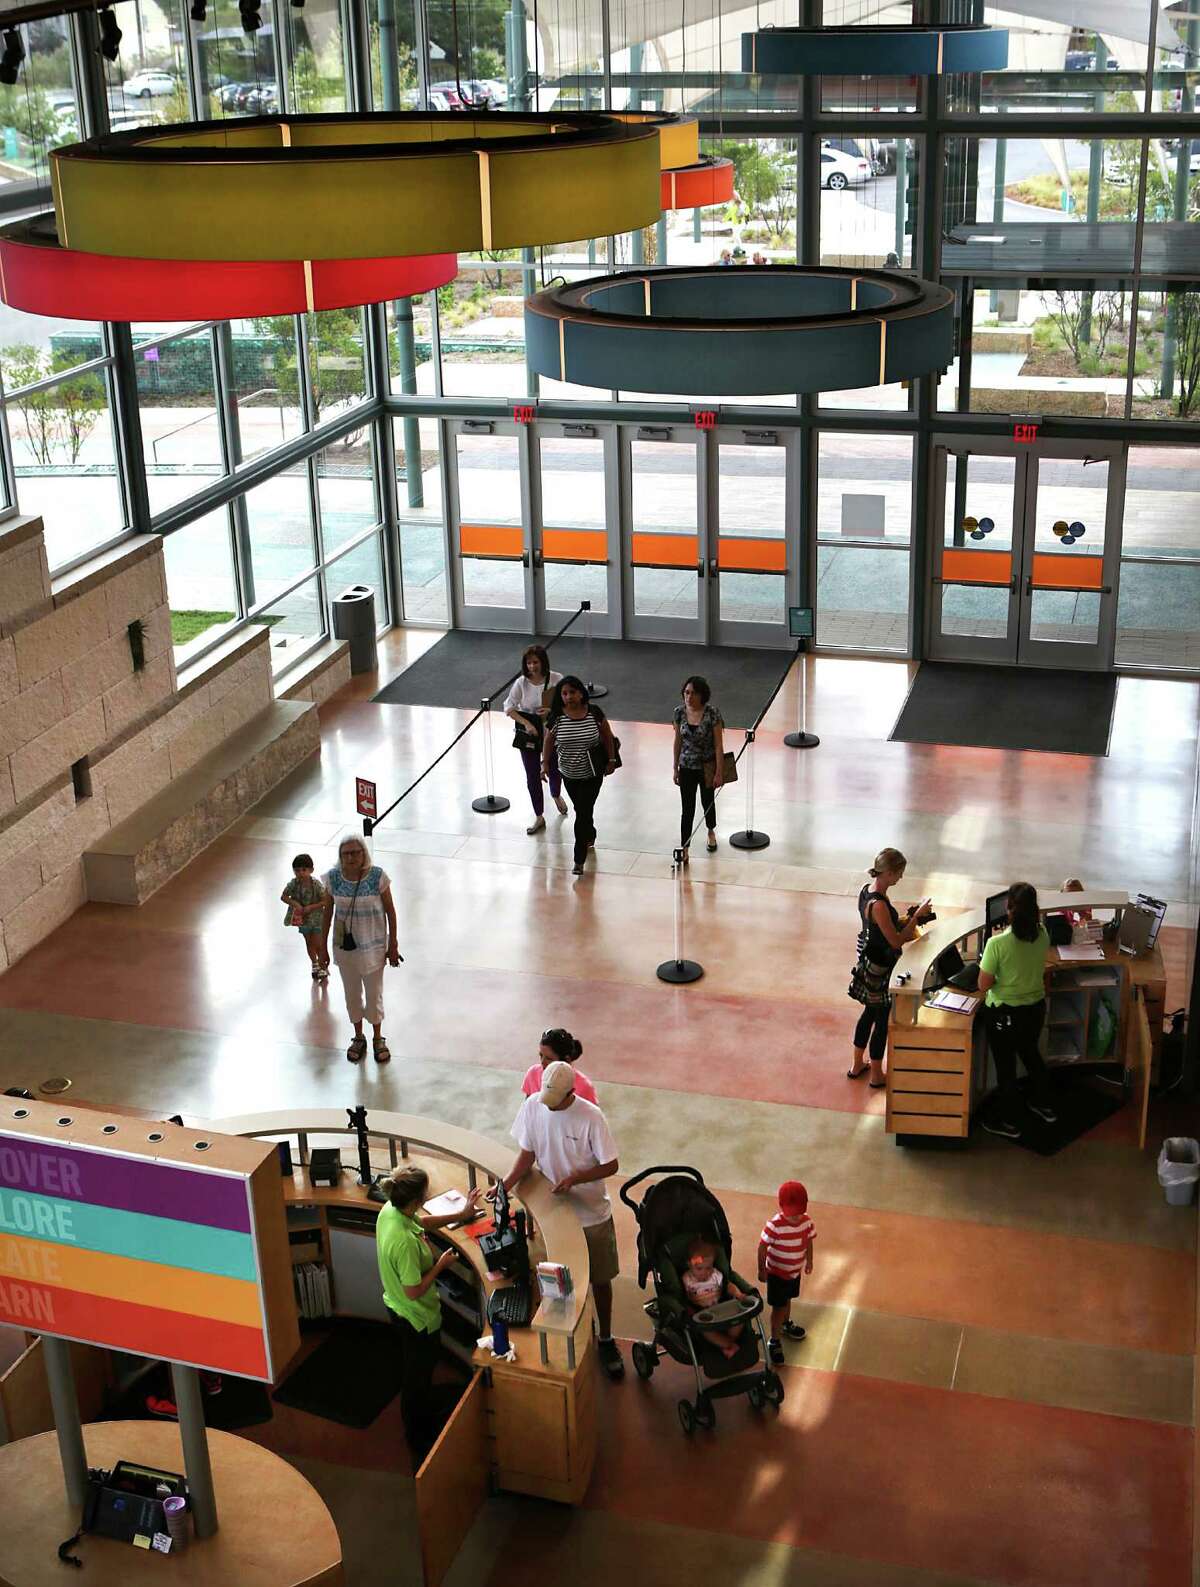 Visitors stream in the front entrance of The DoSeum on Wednesday, August 26, 2015. The DoSeum's 231 parking spaces are proving not to be enough and the popular kid and family location is trying to acquire 3 addresses on E. Mulberry Ave. to expand parking.